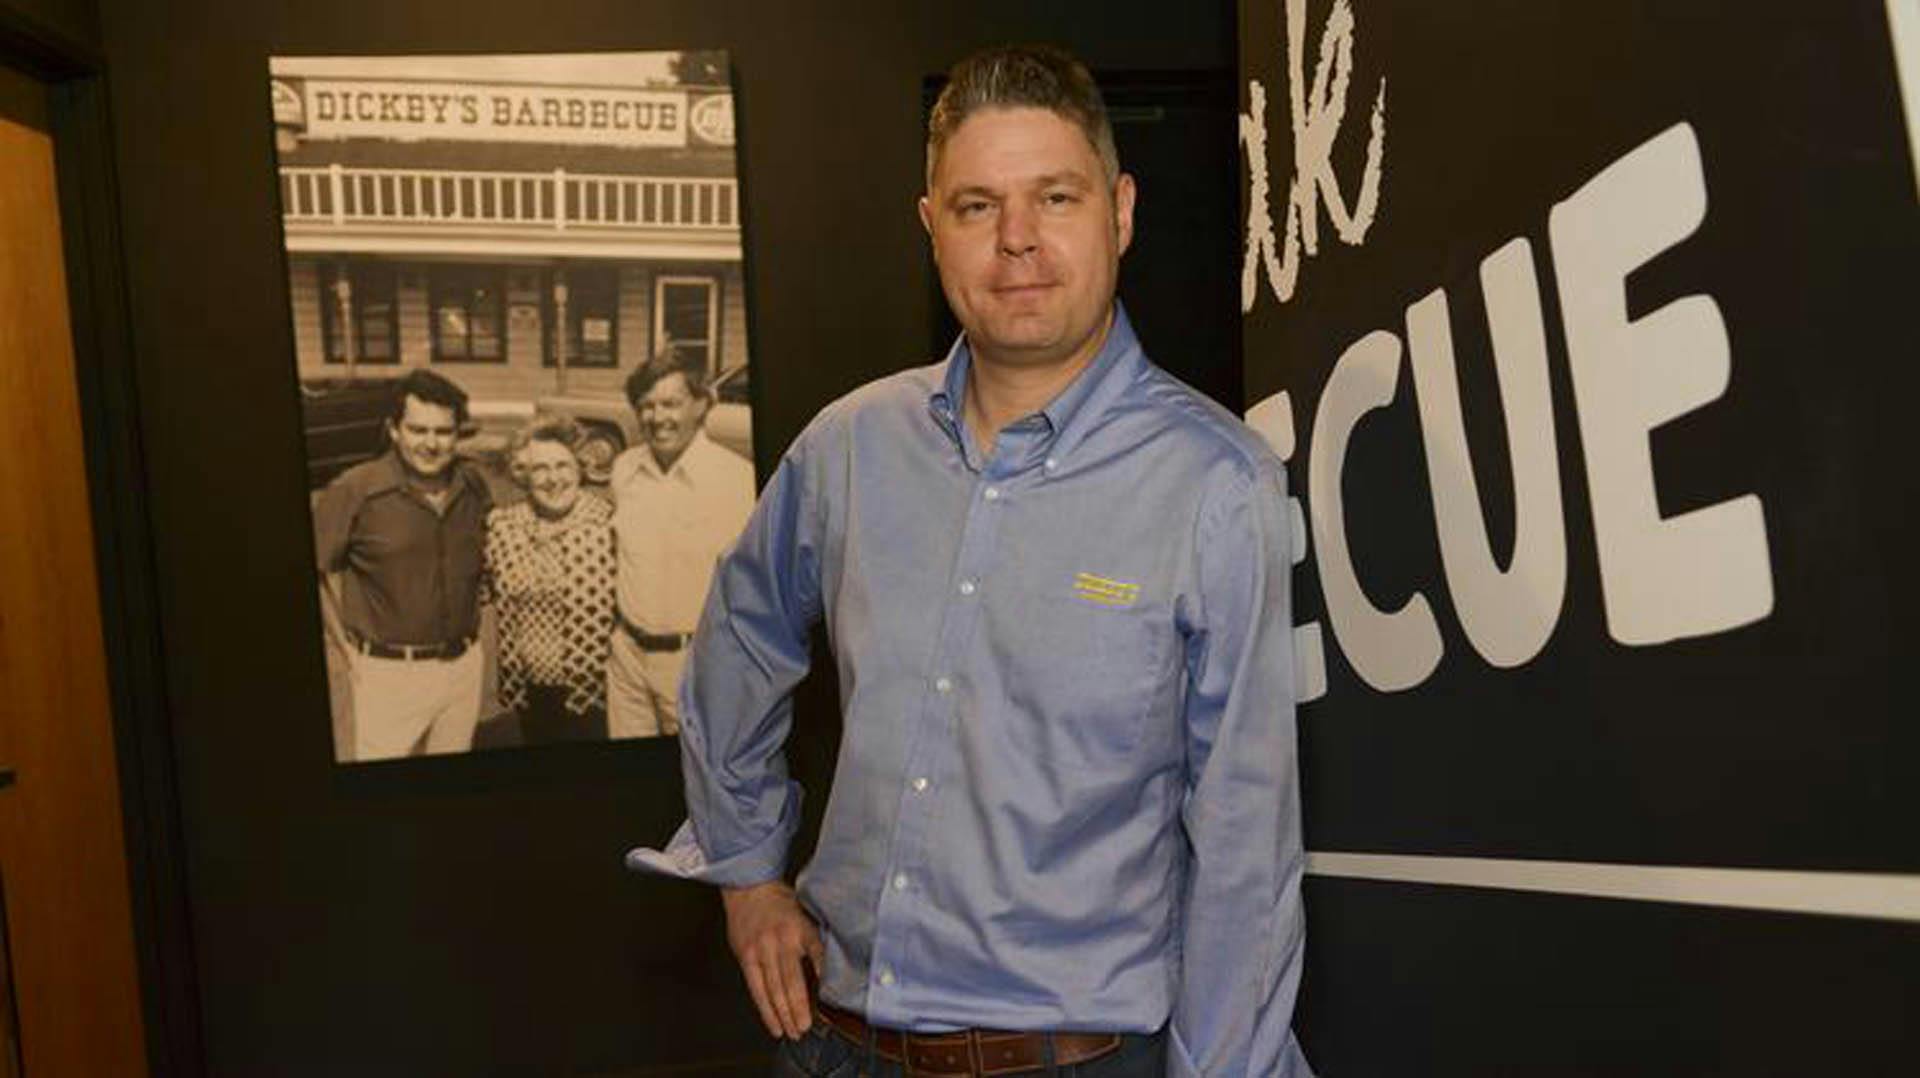 Q&A with Dickey’s CEO Roland Dickey, Jr. 